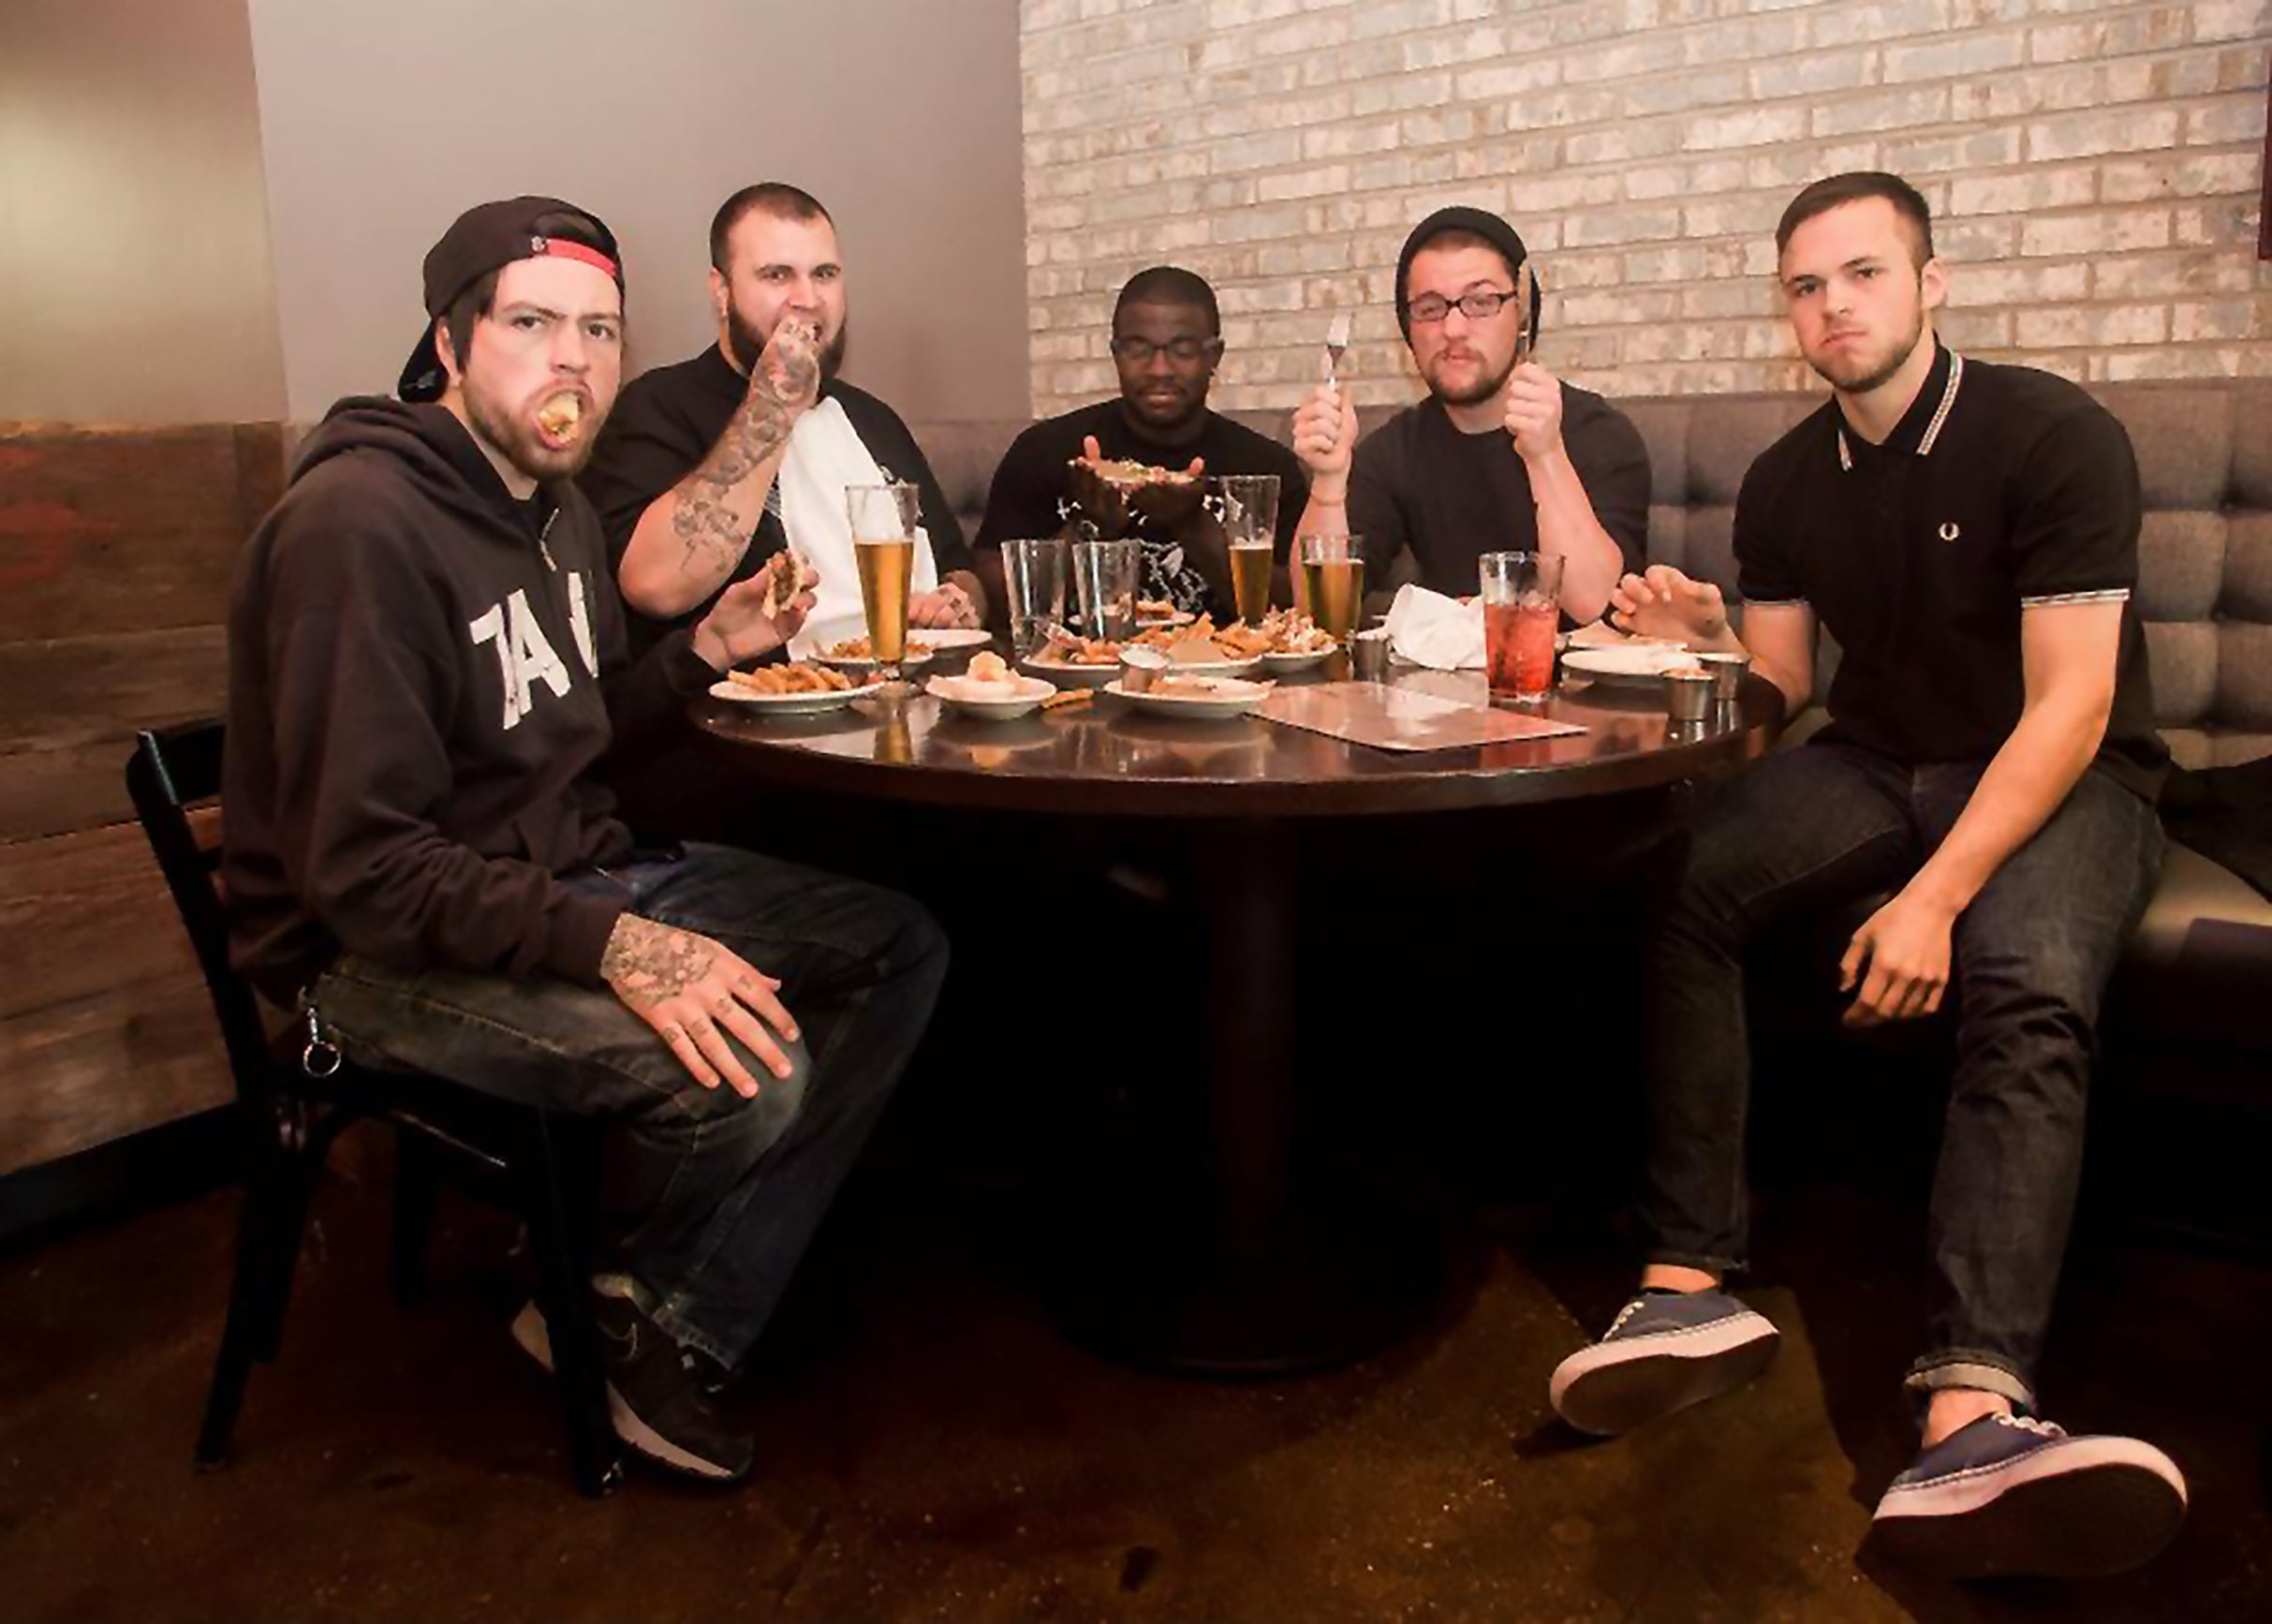 Oceano with special guests at Brick by Brick